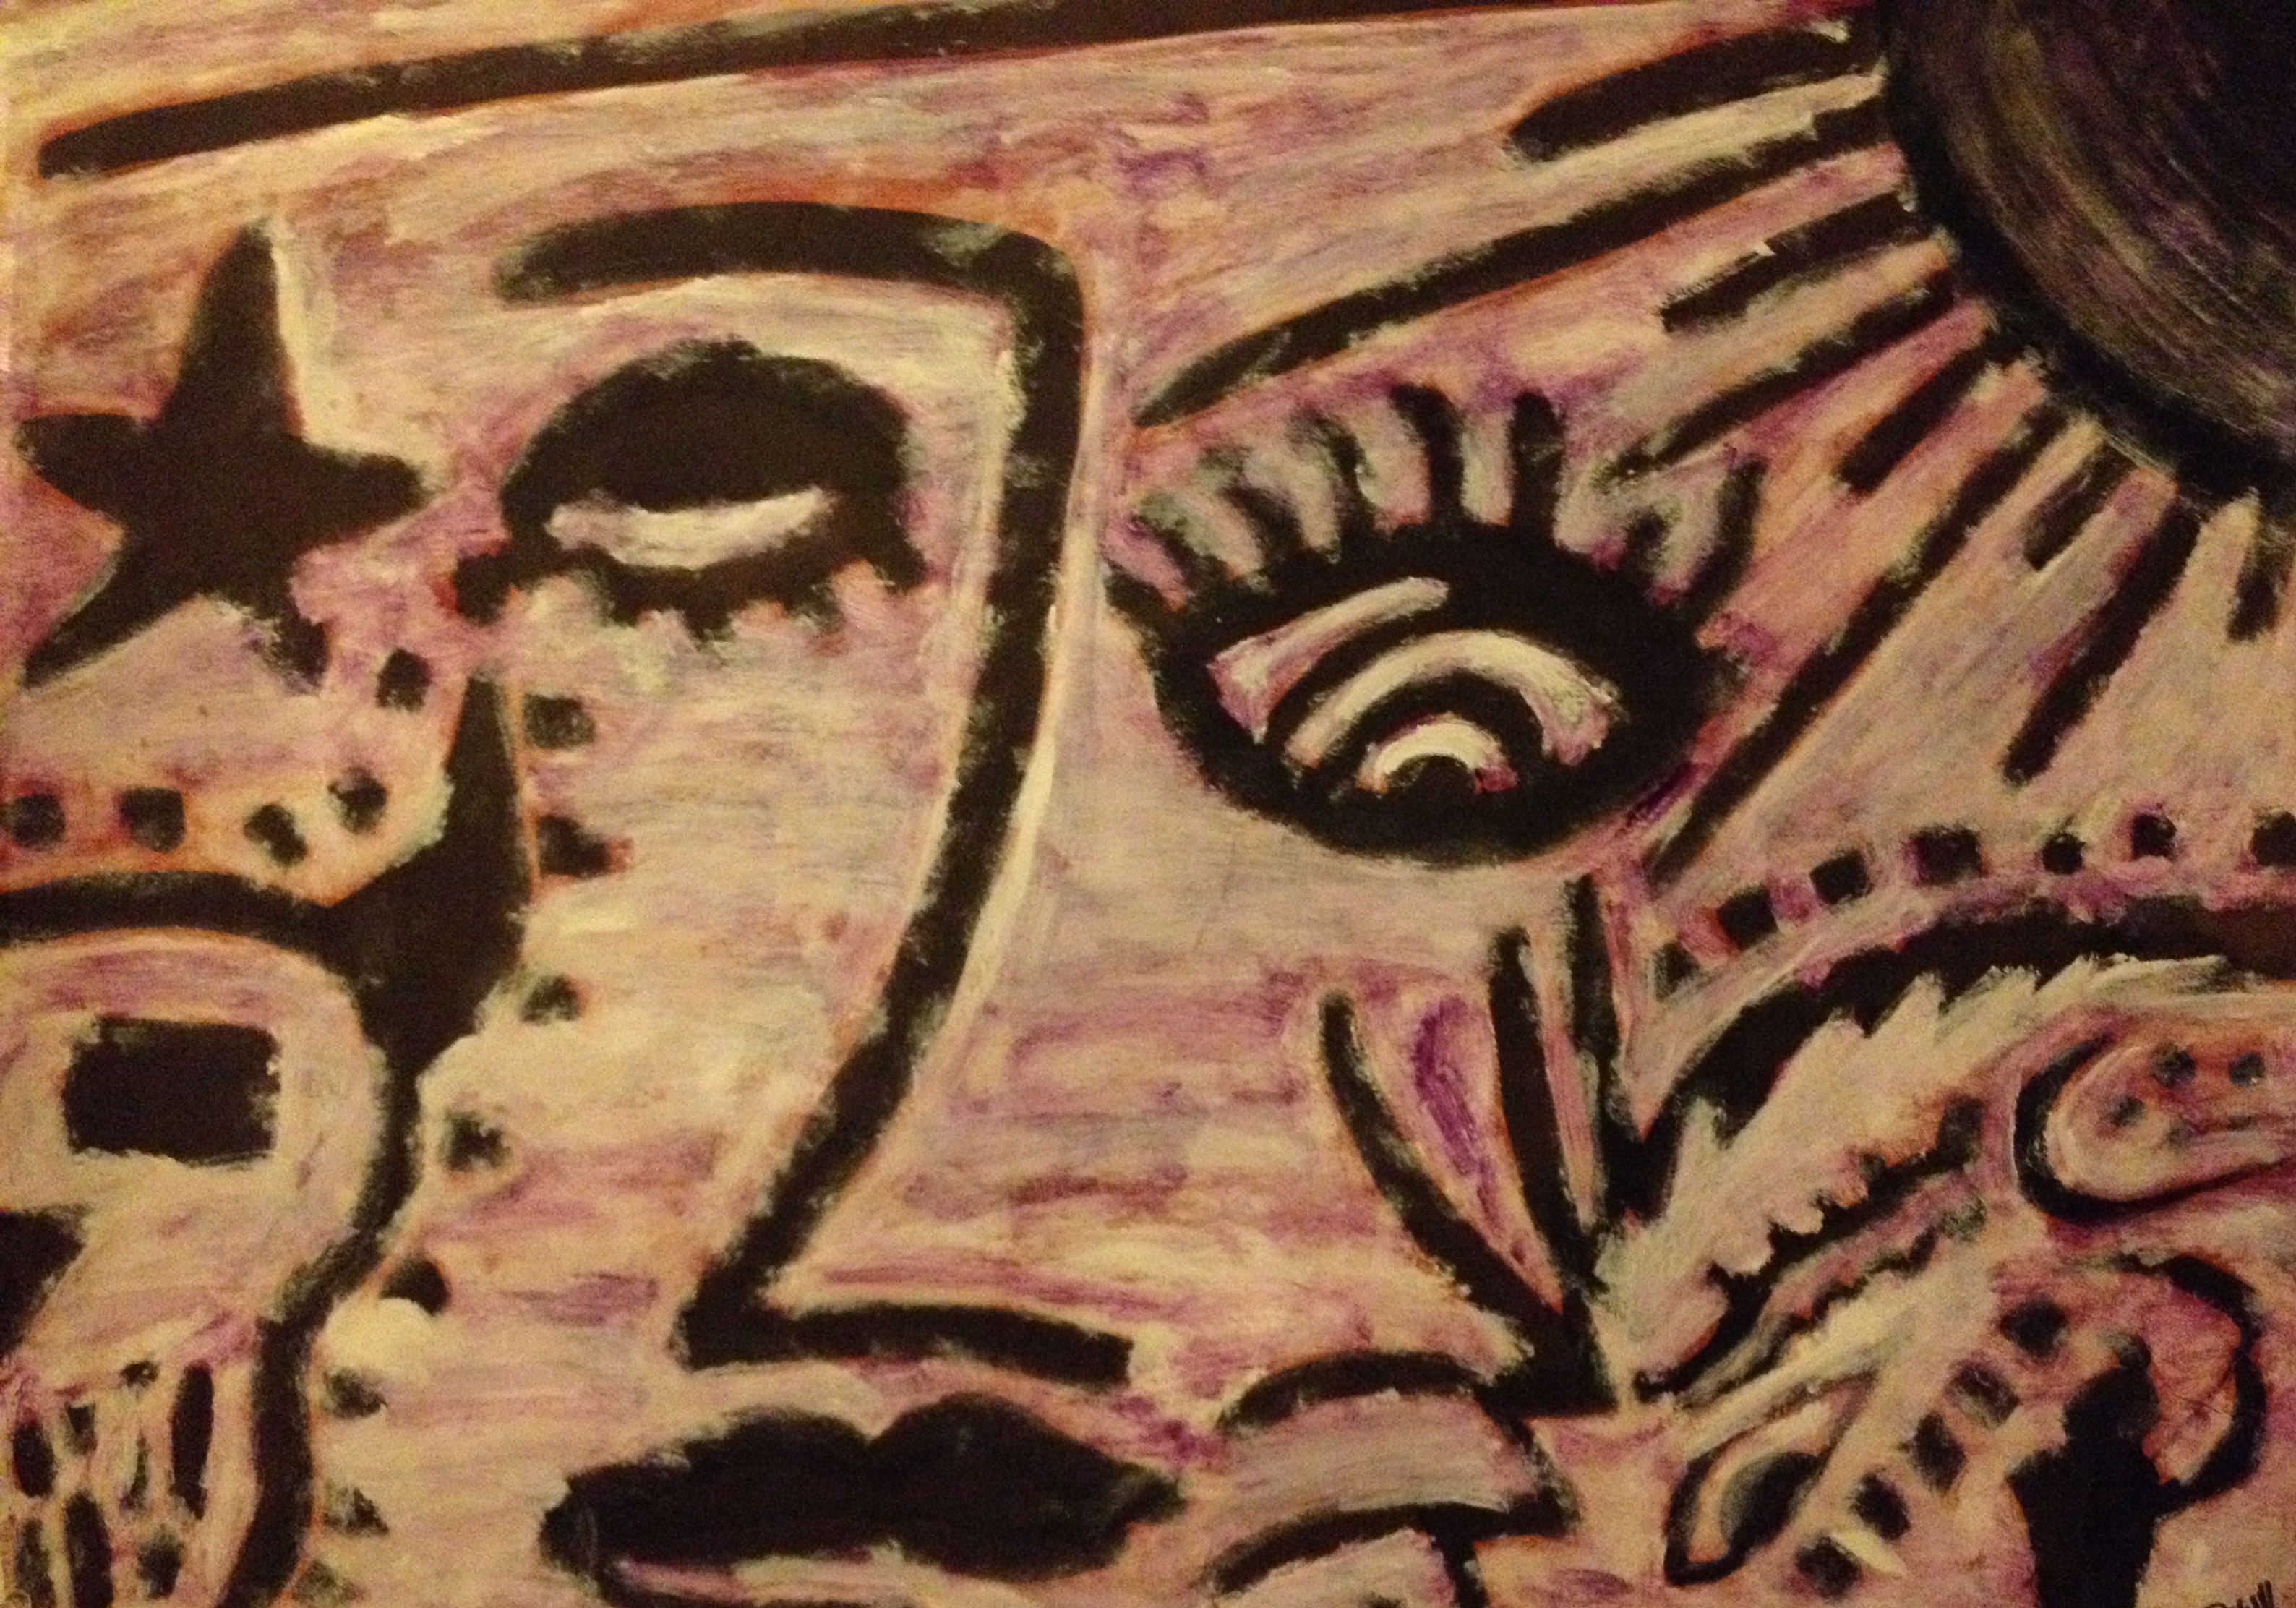 A Face Expressed (2007)